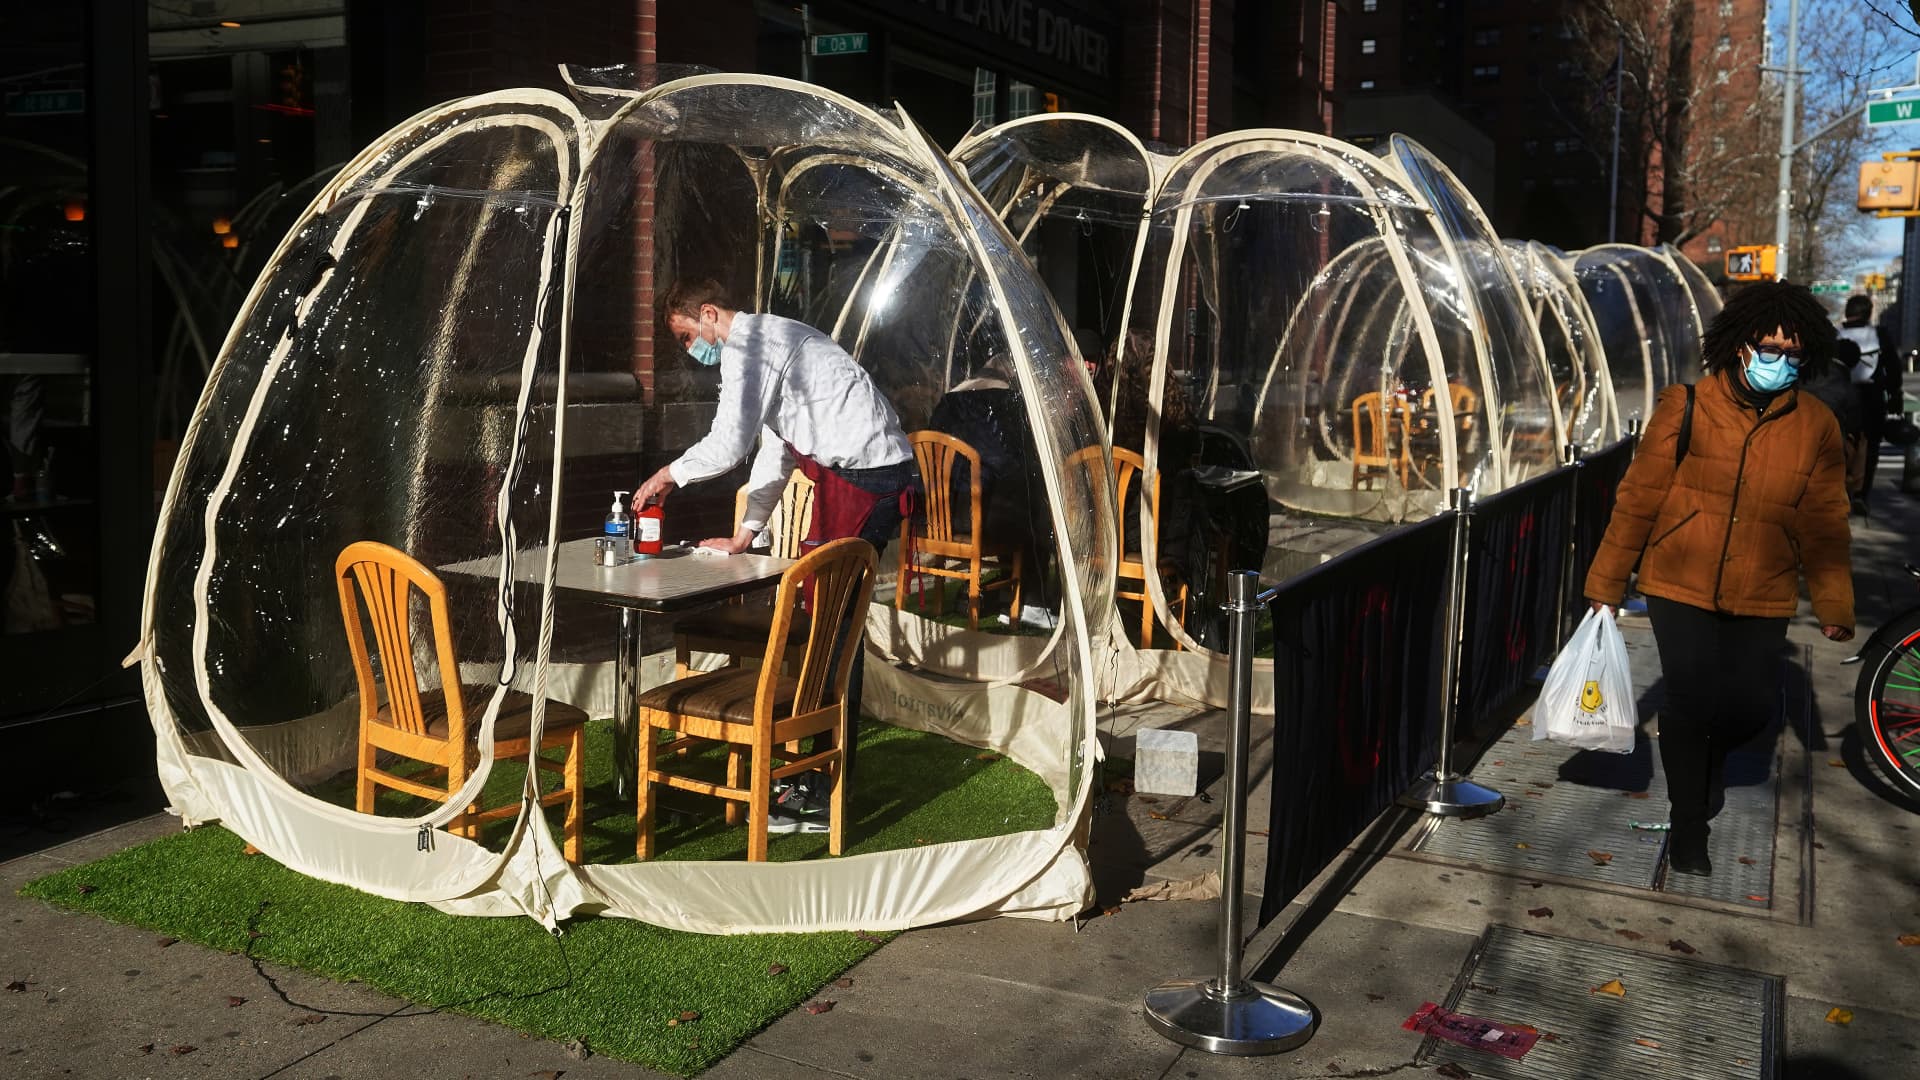 A New York waiter sets a table in a plastic bubble outside the Olympic Flame Diner in Manhattan on Dec. 15, 2020.